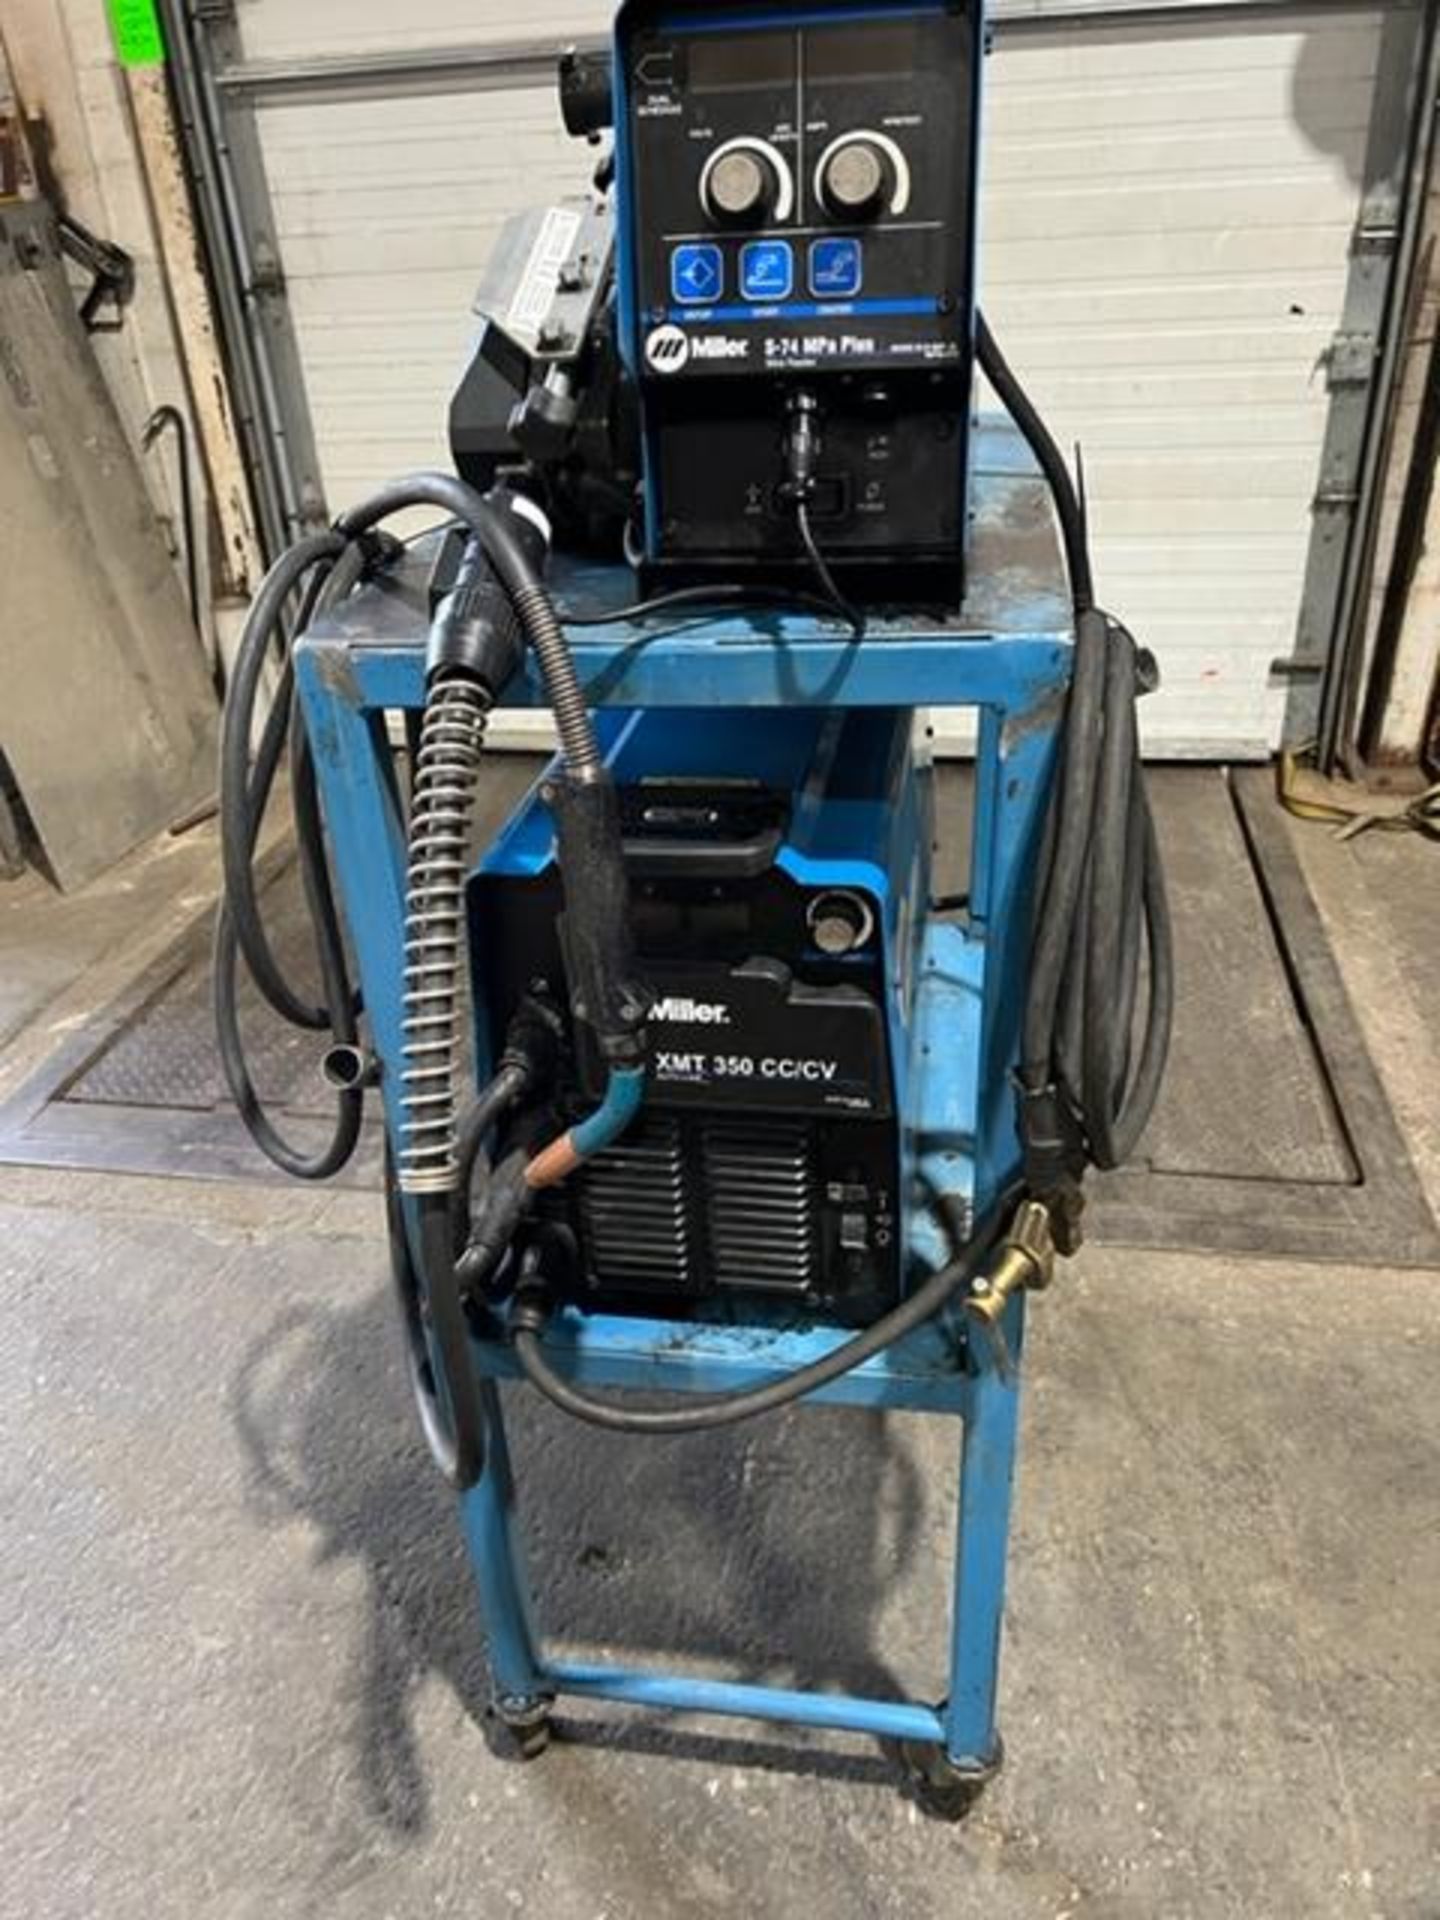 Miller XMT 350 CC/CV Multiprocess Welder with S-74MPA Plus Wire Feeder 4-wheel - COMPLETE - Image 2 of 5